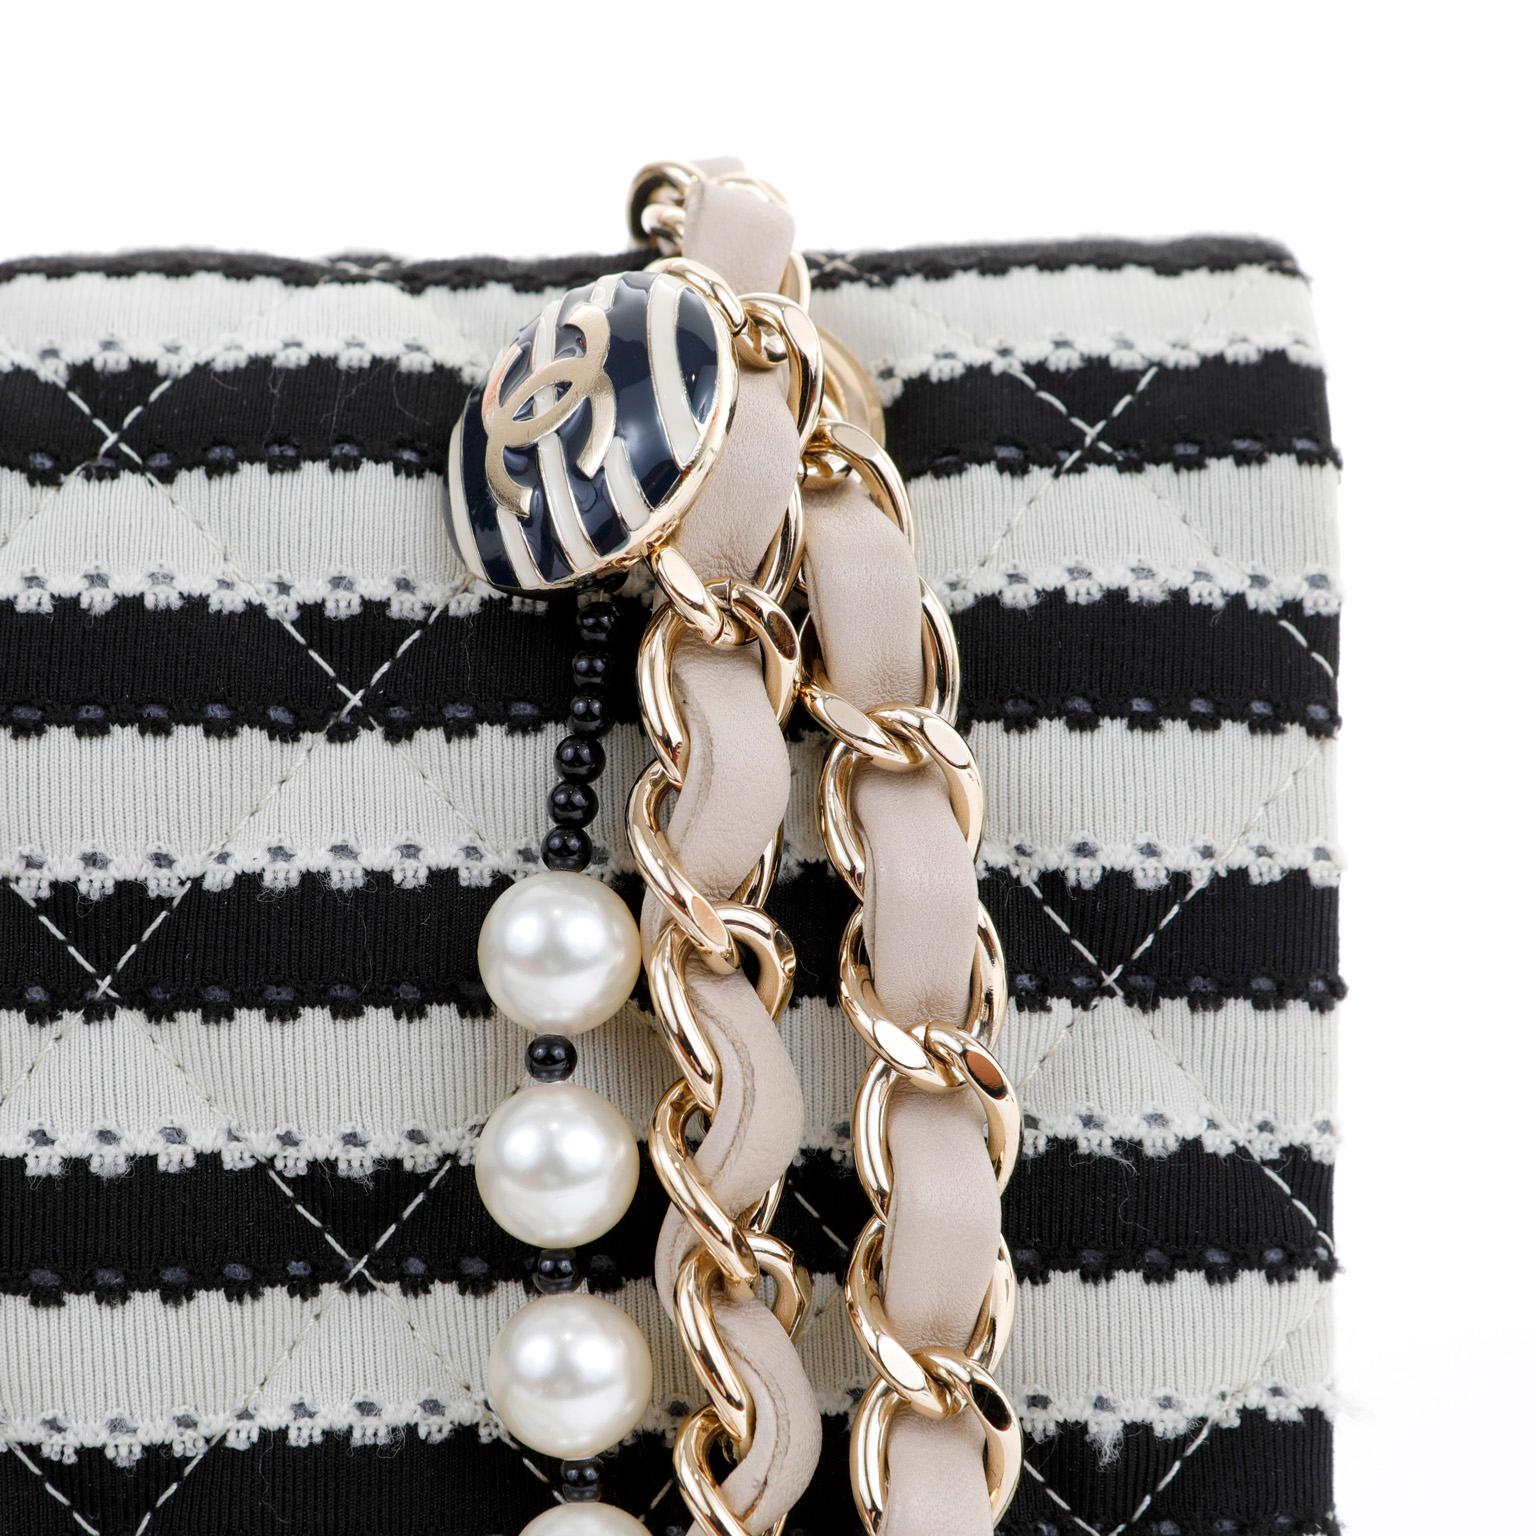 Chanel Black and White Striped Medium Classic Flap with Pearls 2